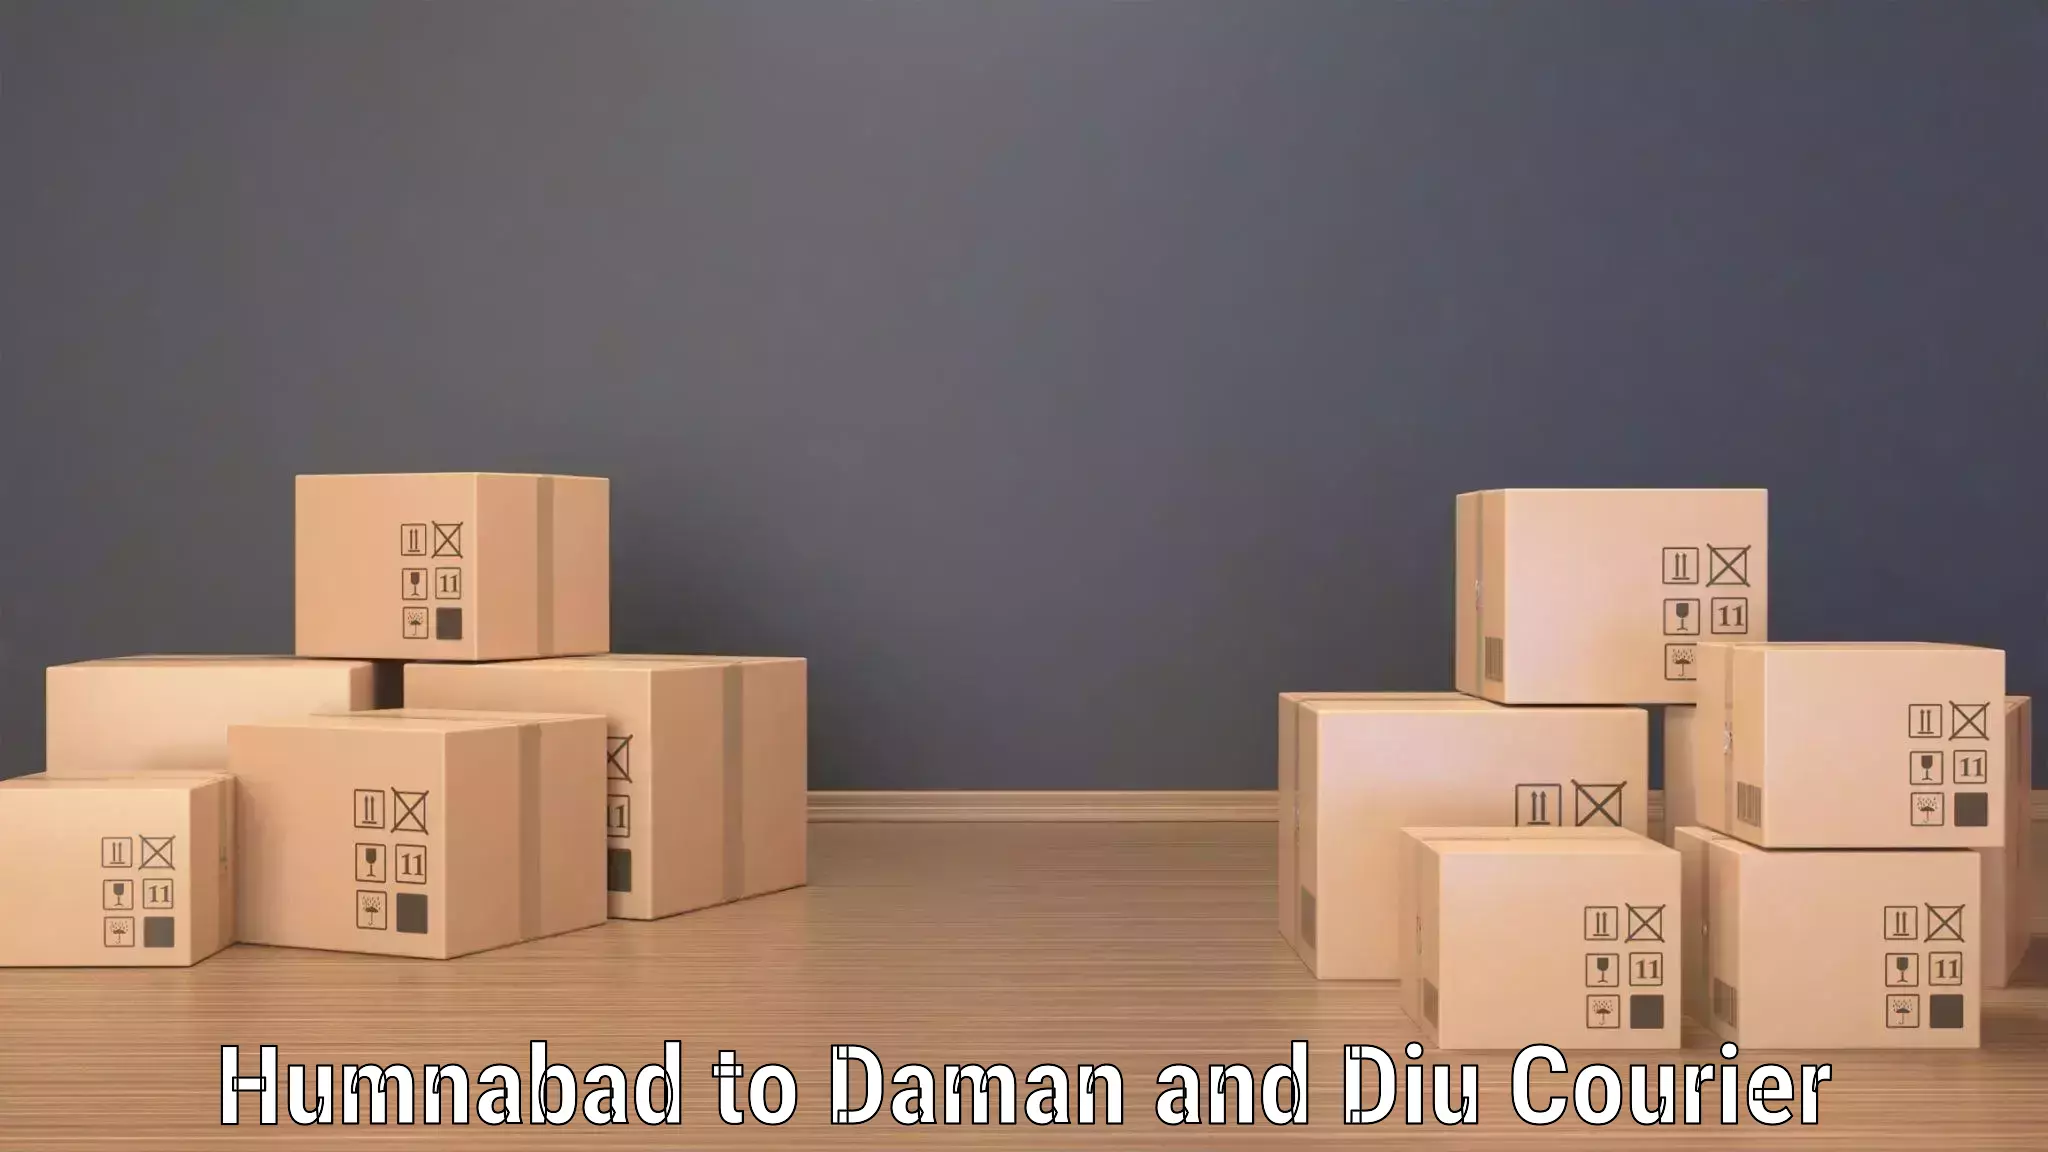 Easy return solutions Humnabad to Daman and Diu